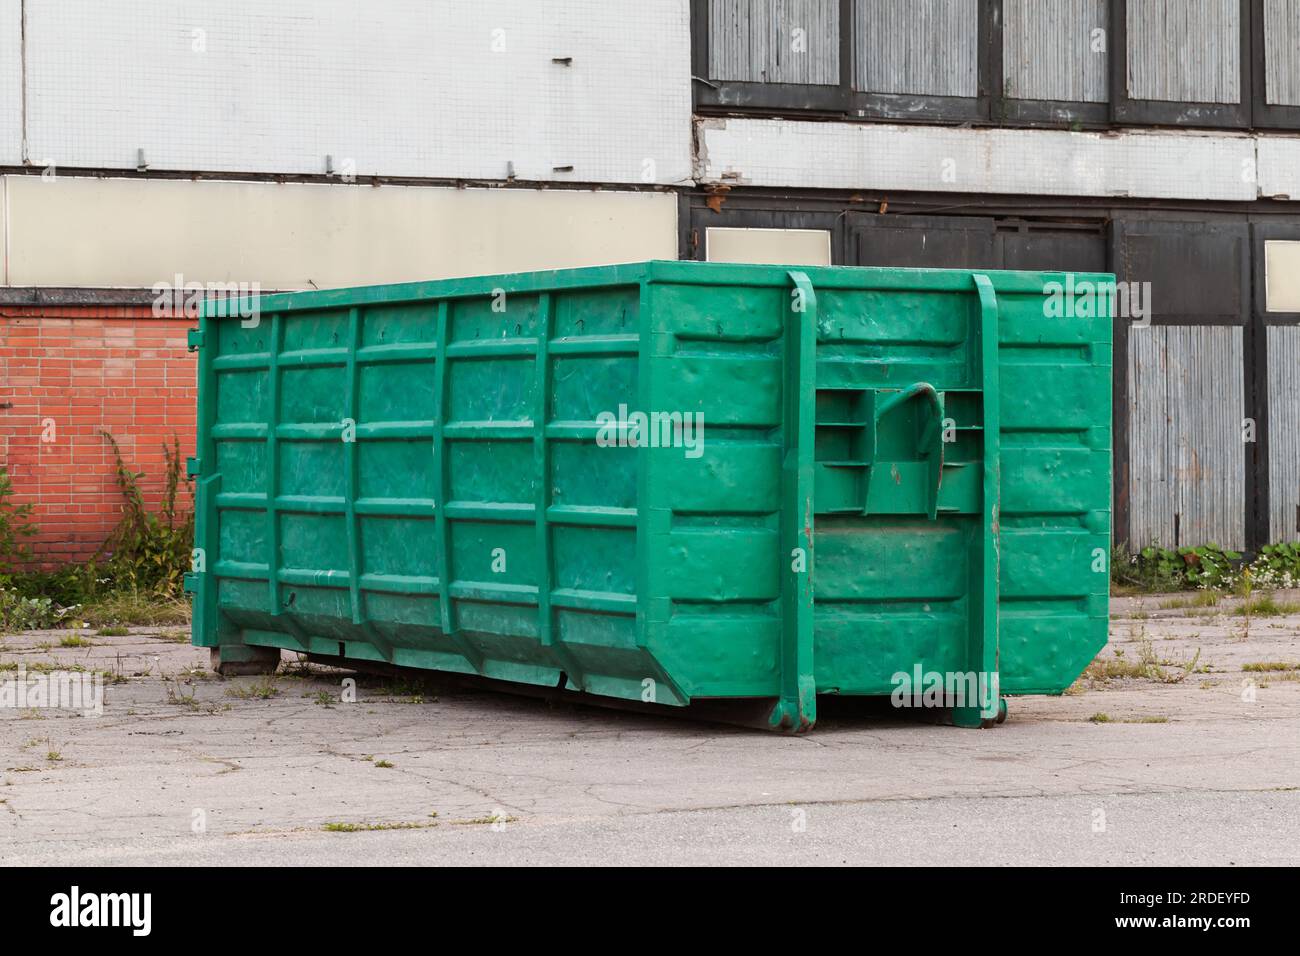 https://c8.alamy.com/comp/2RDEYFD/big-green-trash-container-stands-in-a-city-near-concrete-wall-2RDEYFD.jpg